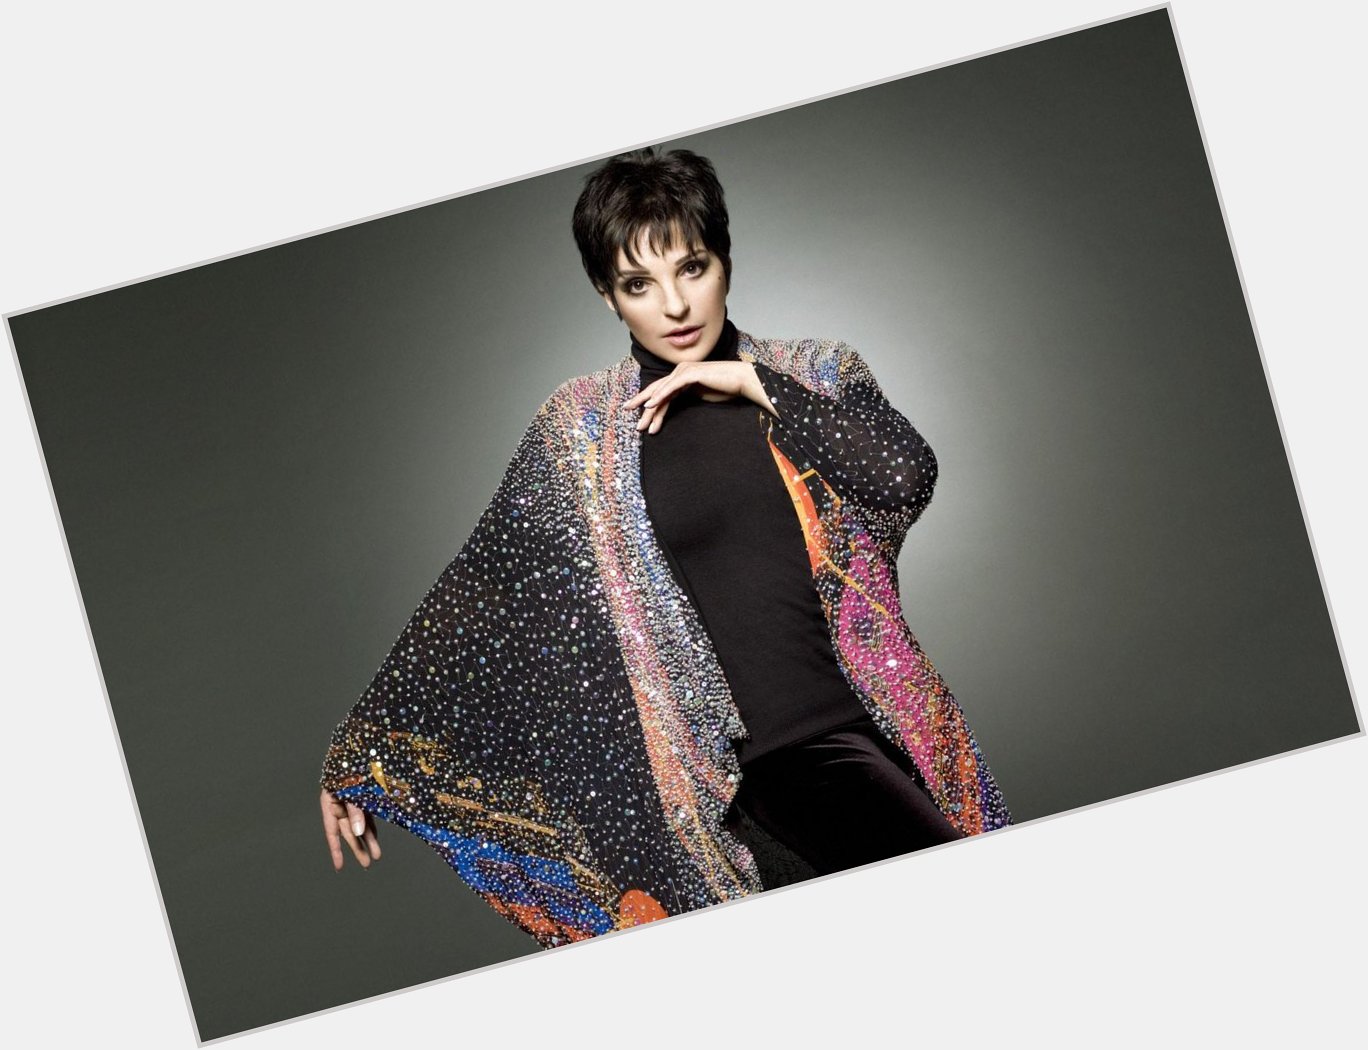 From Cabaret to Results - five reasons we love Liza Minnelli on this, her 69th birthday:  